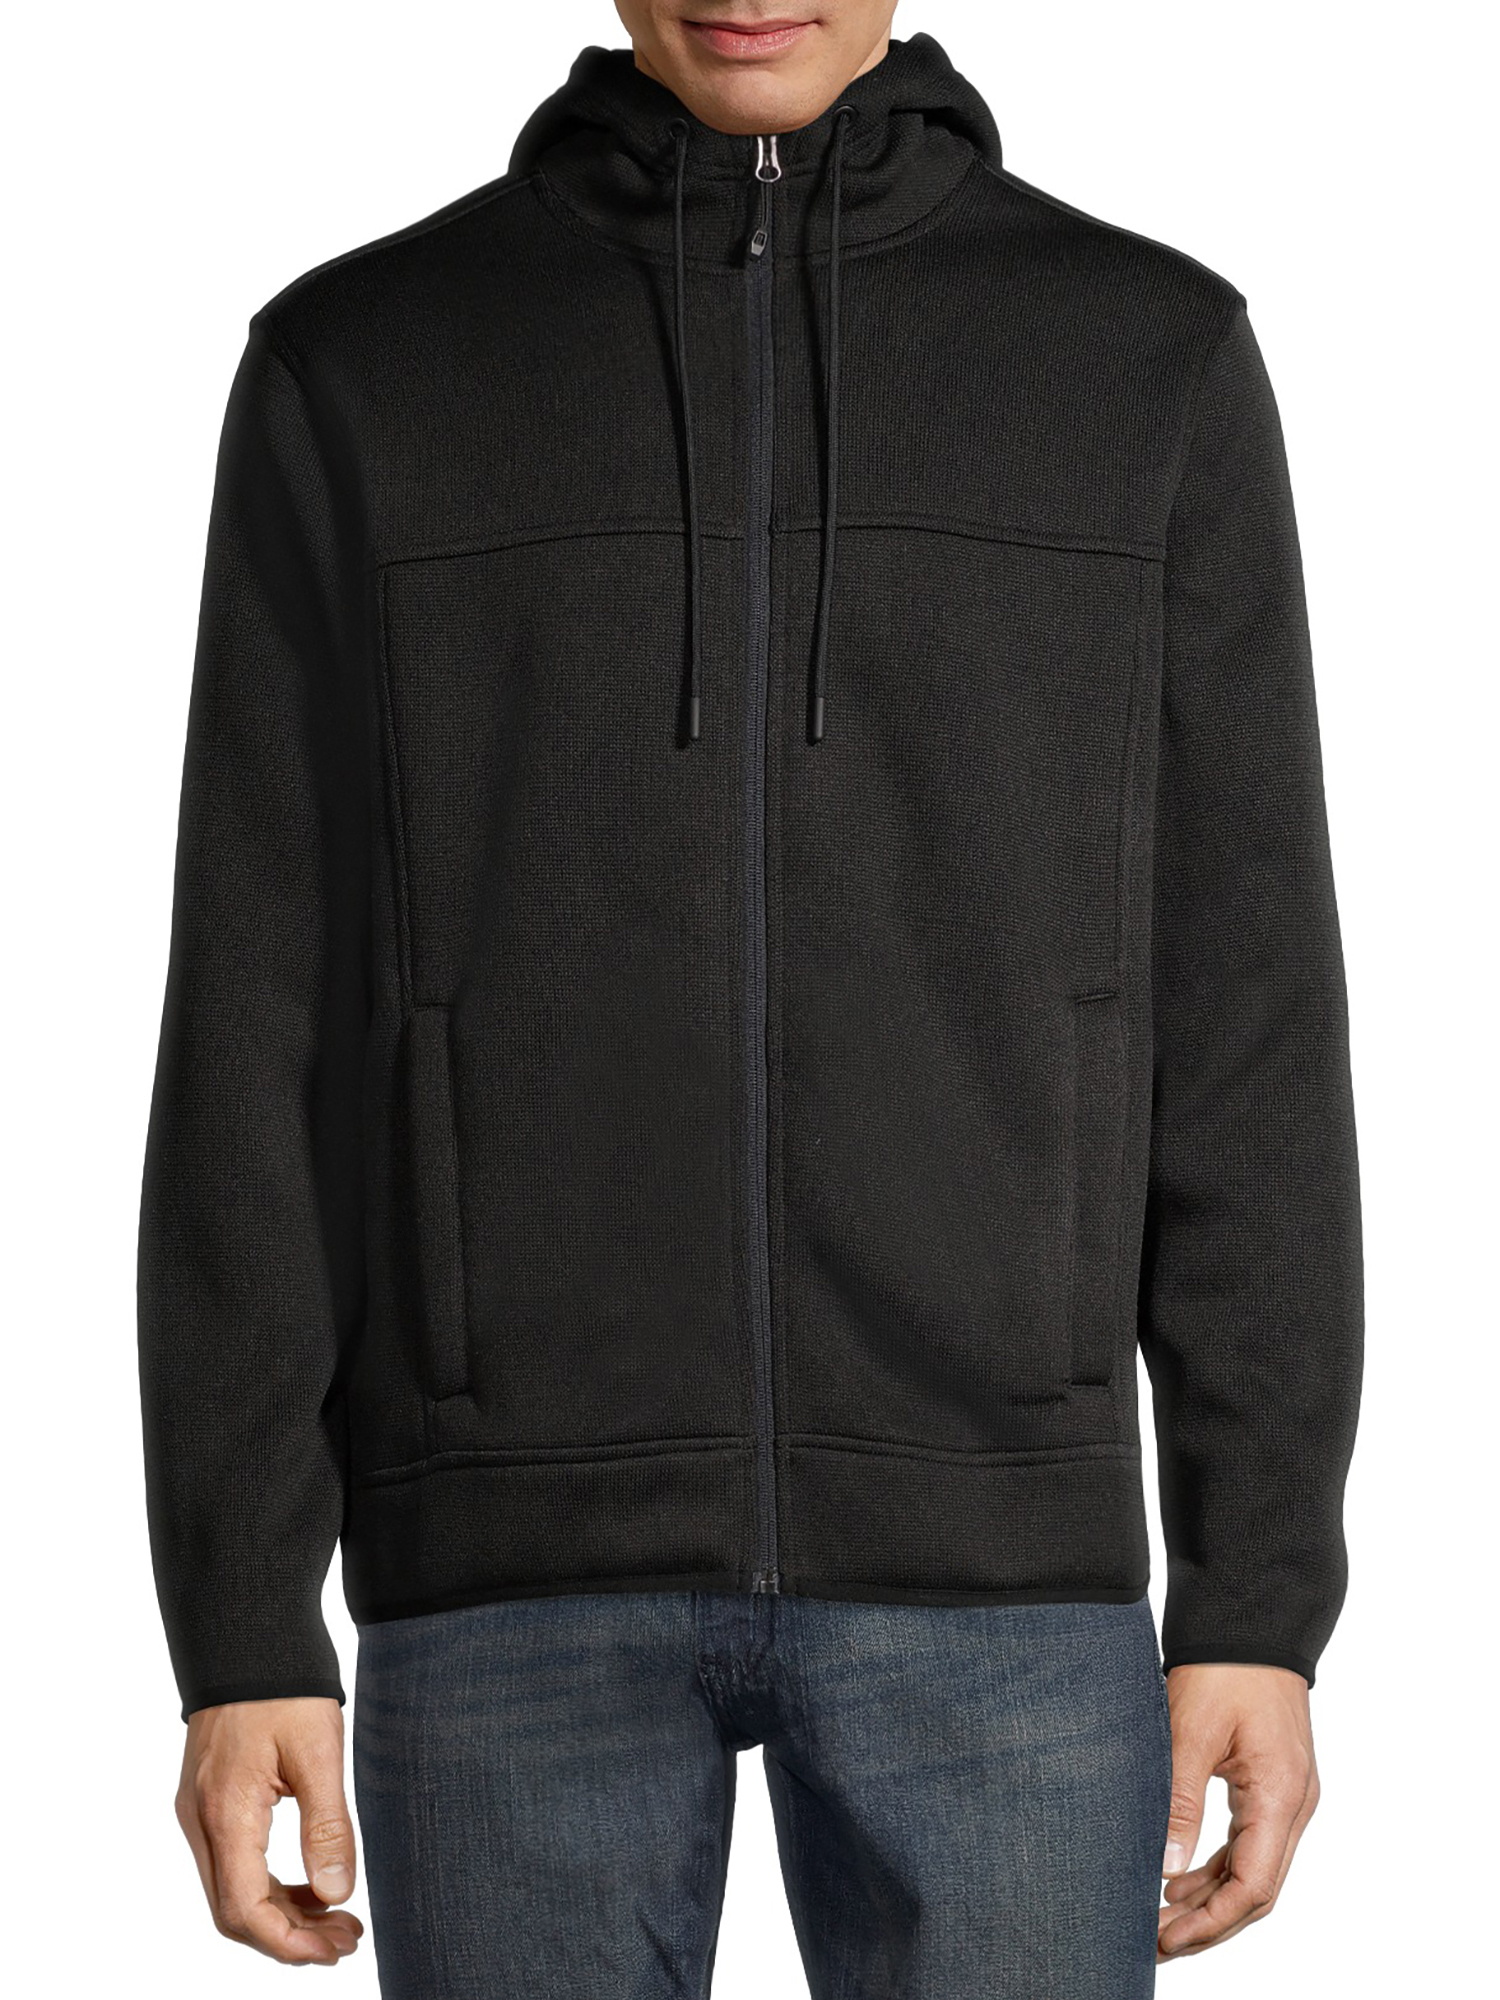 George Men's and Big Men's Sweater Fleece, up to Size 5XL - image 1 of 6